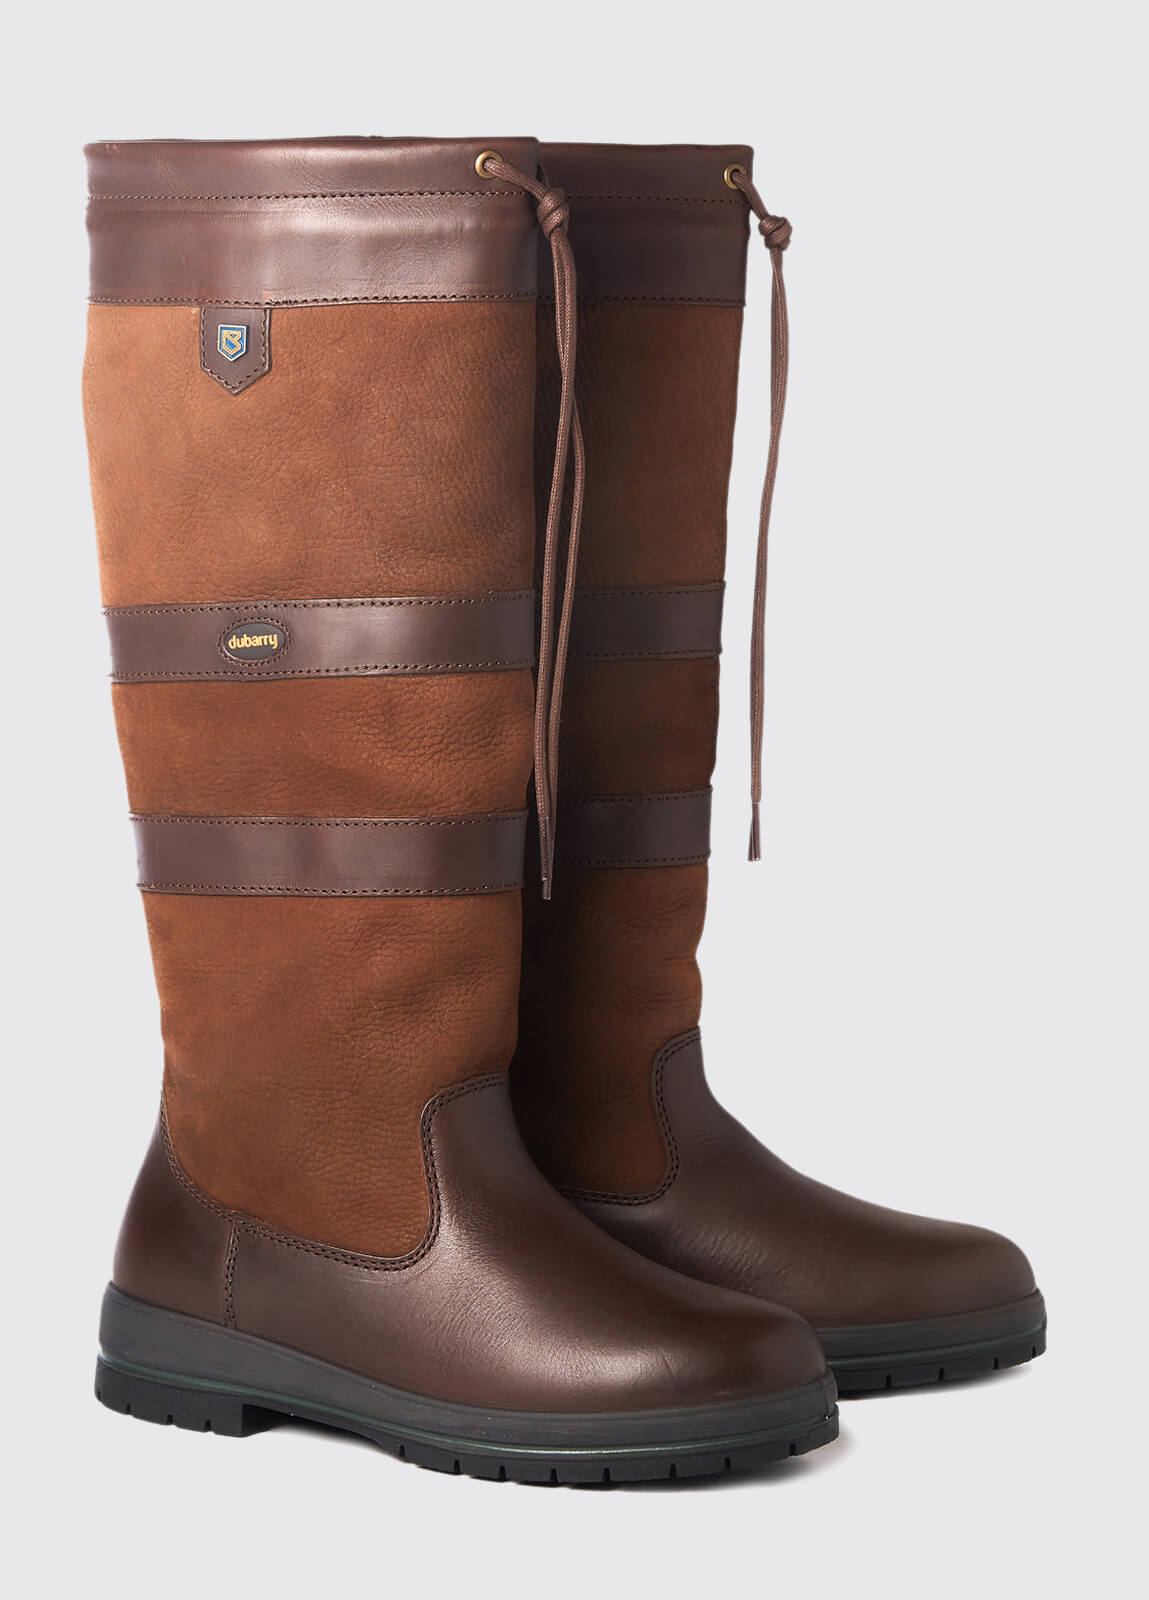 Dubarry Galway Country Boot in Walnut